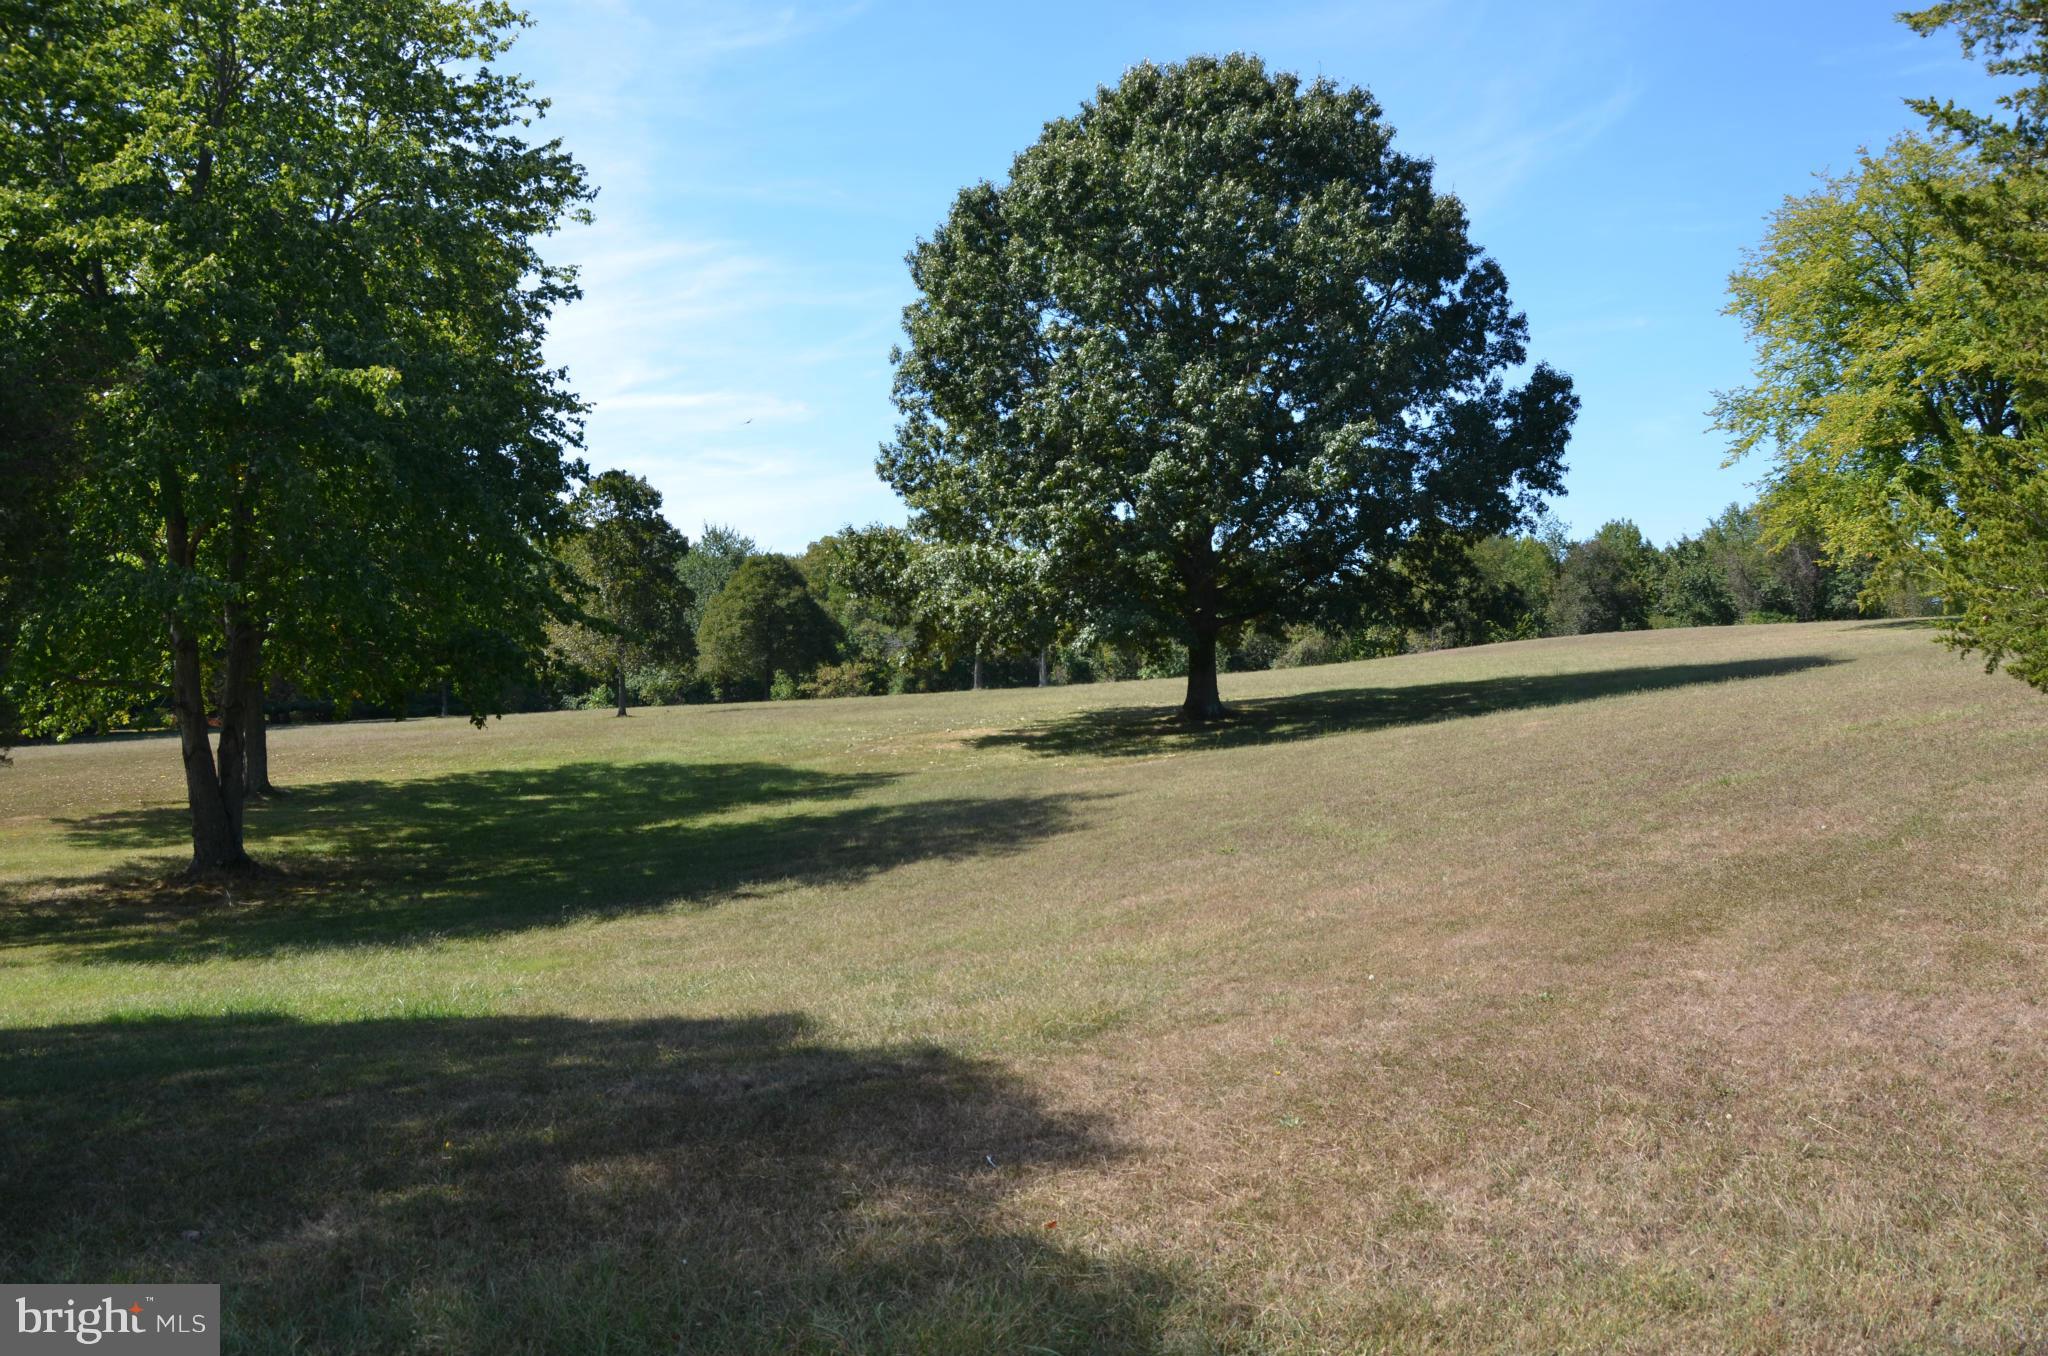 a view of a field with trees in the background